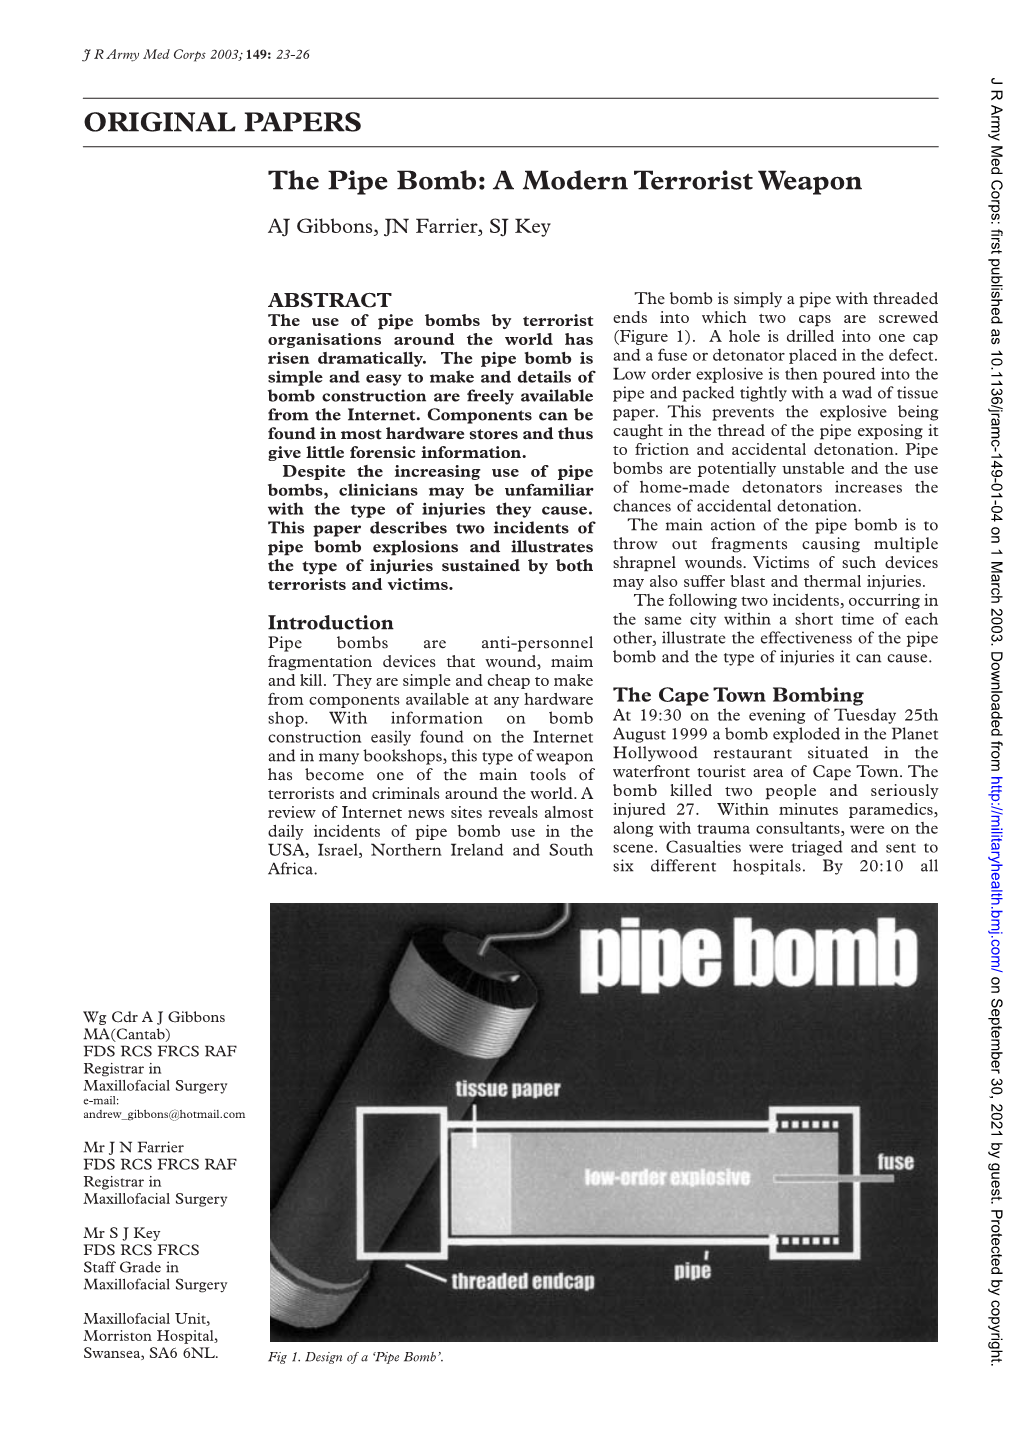 ORIGINAL PAPERS the Pipe Bomb: a Modern Terrorist Weapon